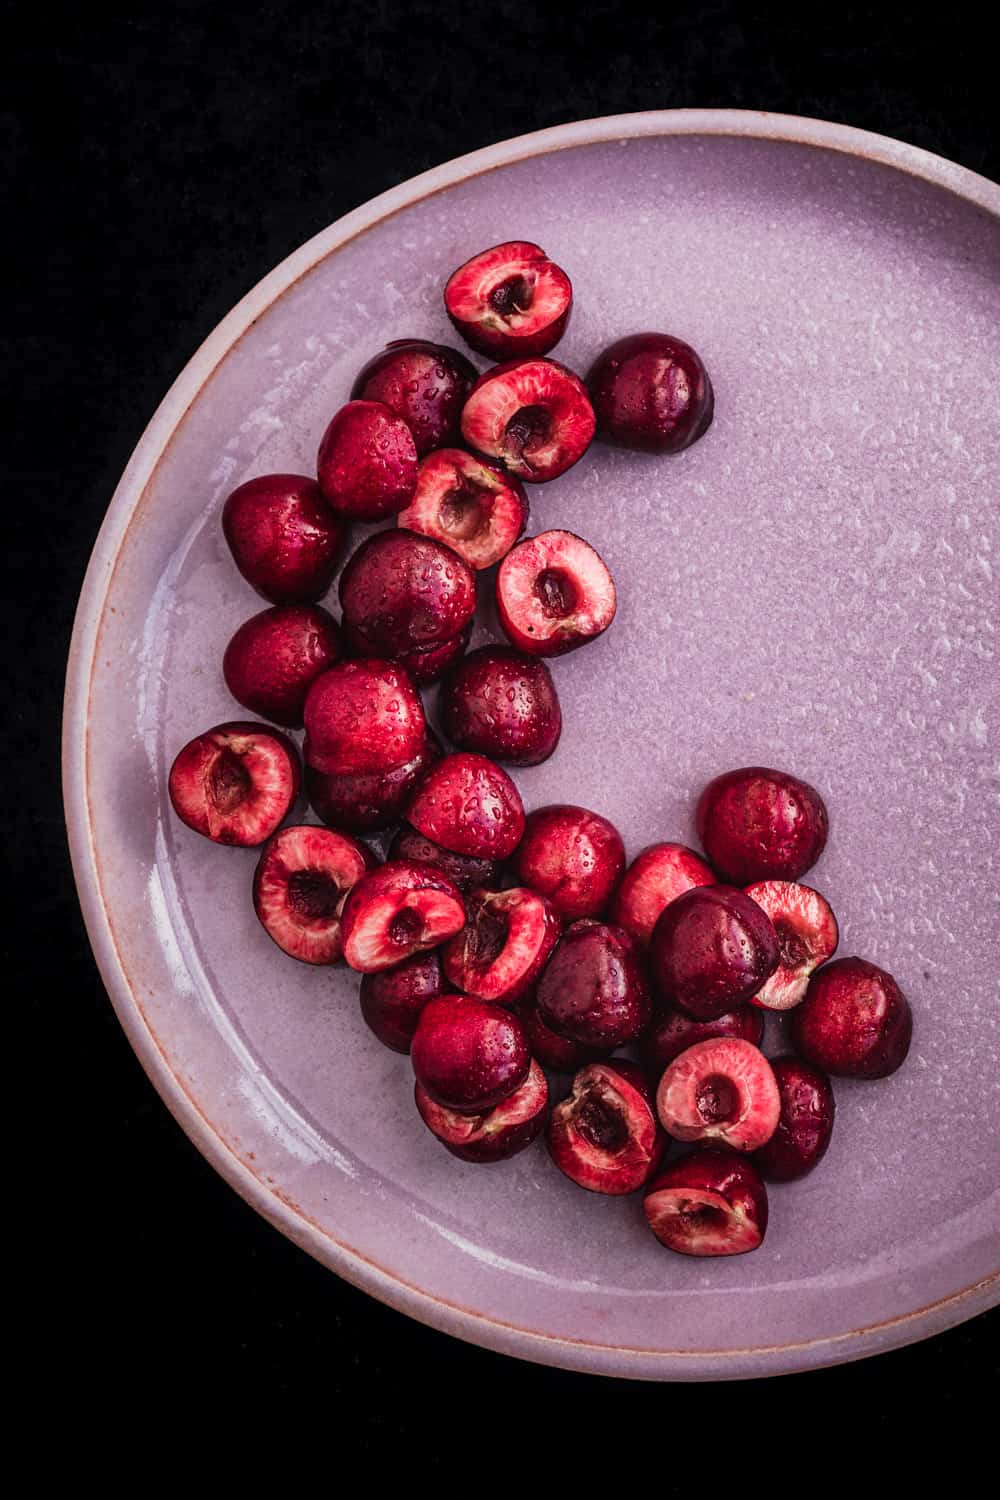 Pitting cherries, cut in half, on a pink plate, overhead shot.